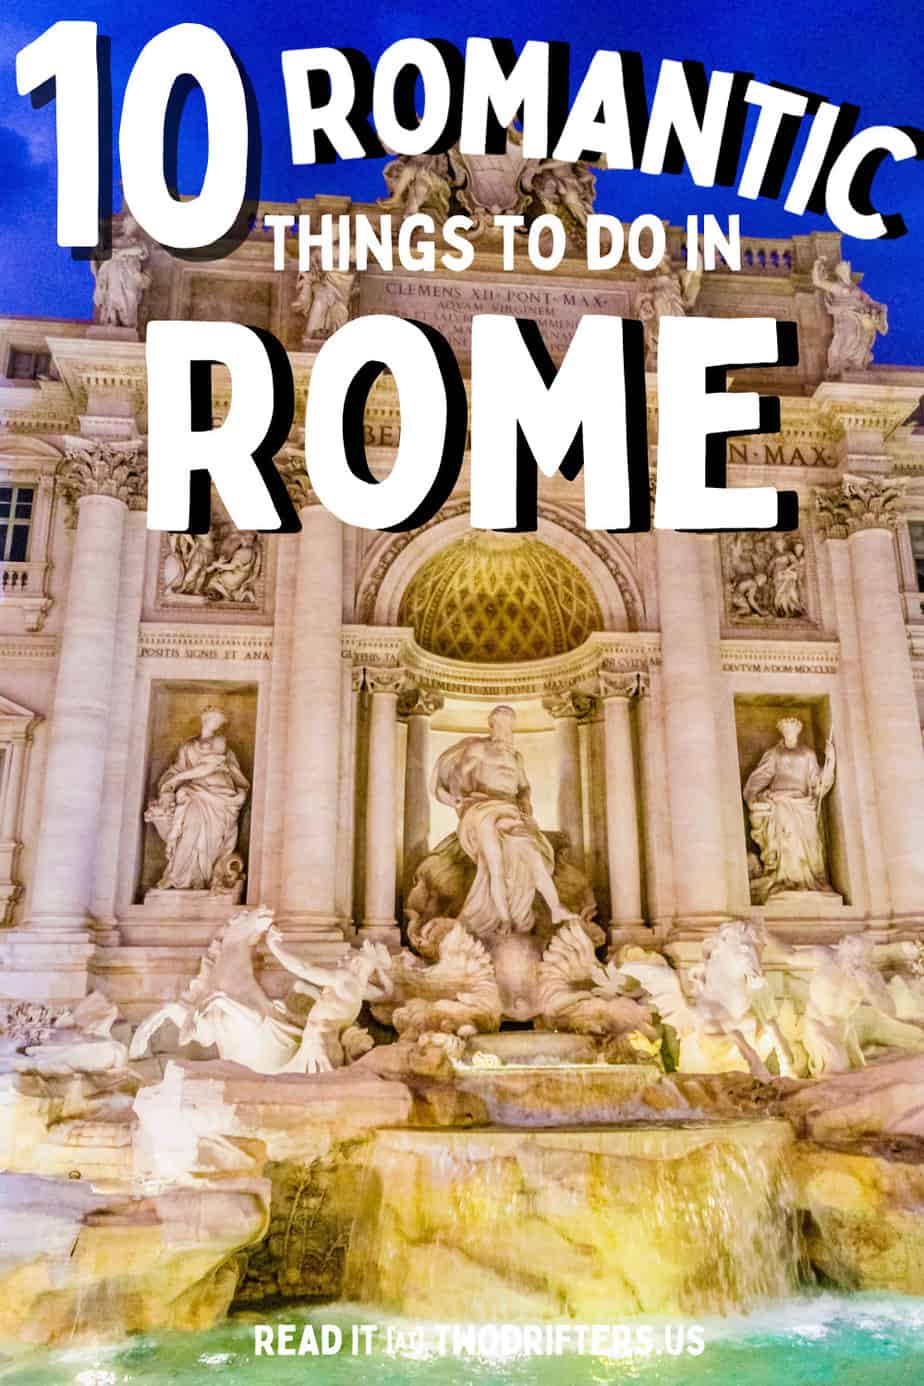 Pinterest social image that says “10 romantic things to do in Rome.”